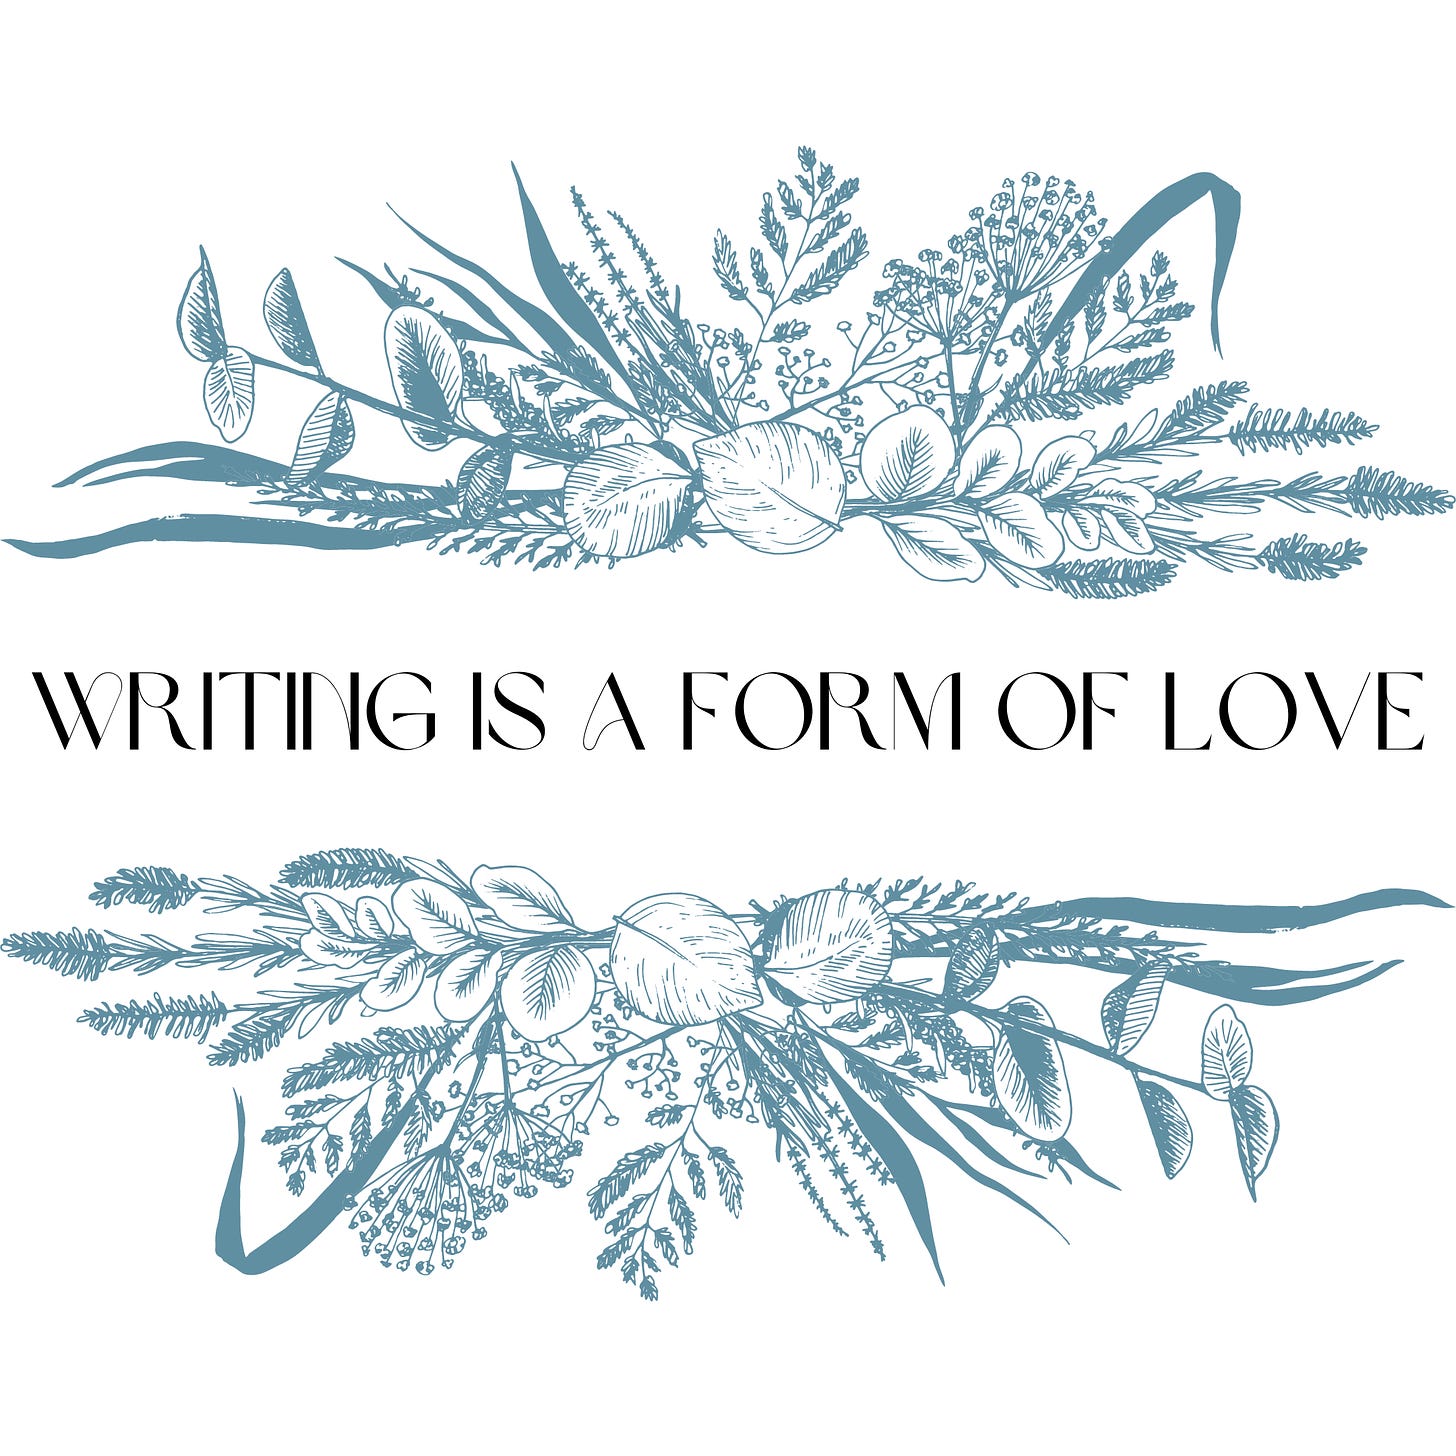 sprays of blue gray flowers around text: writing is a form of love